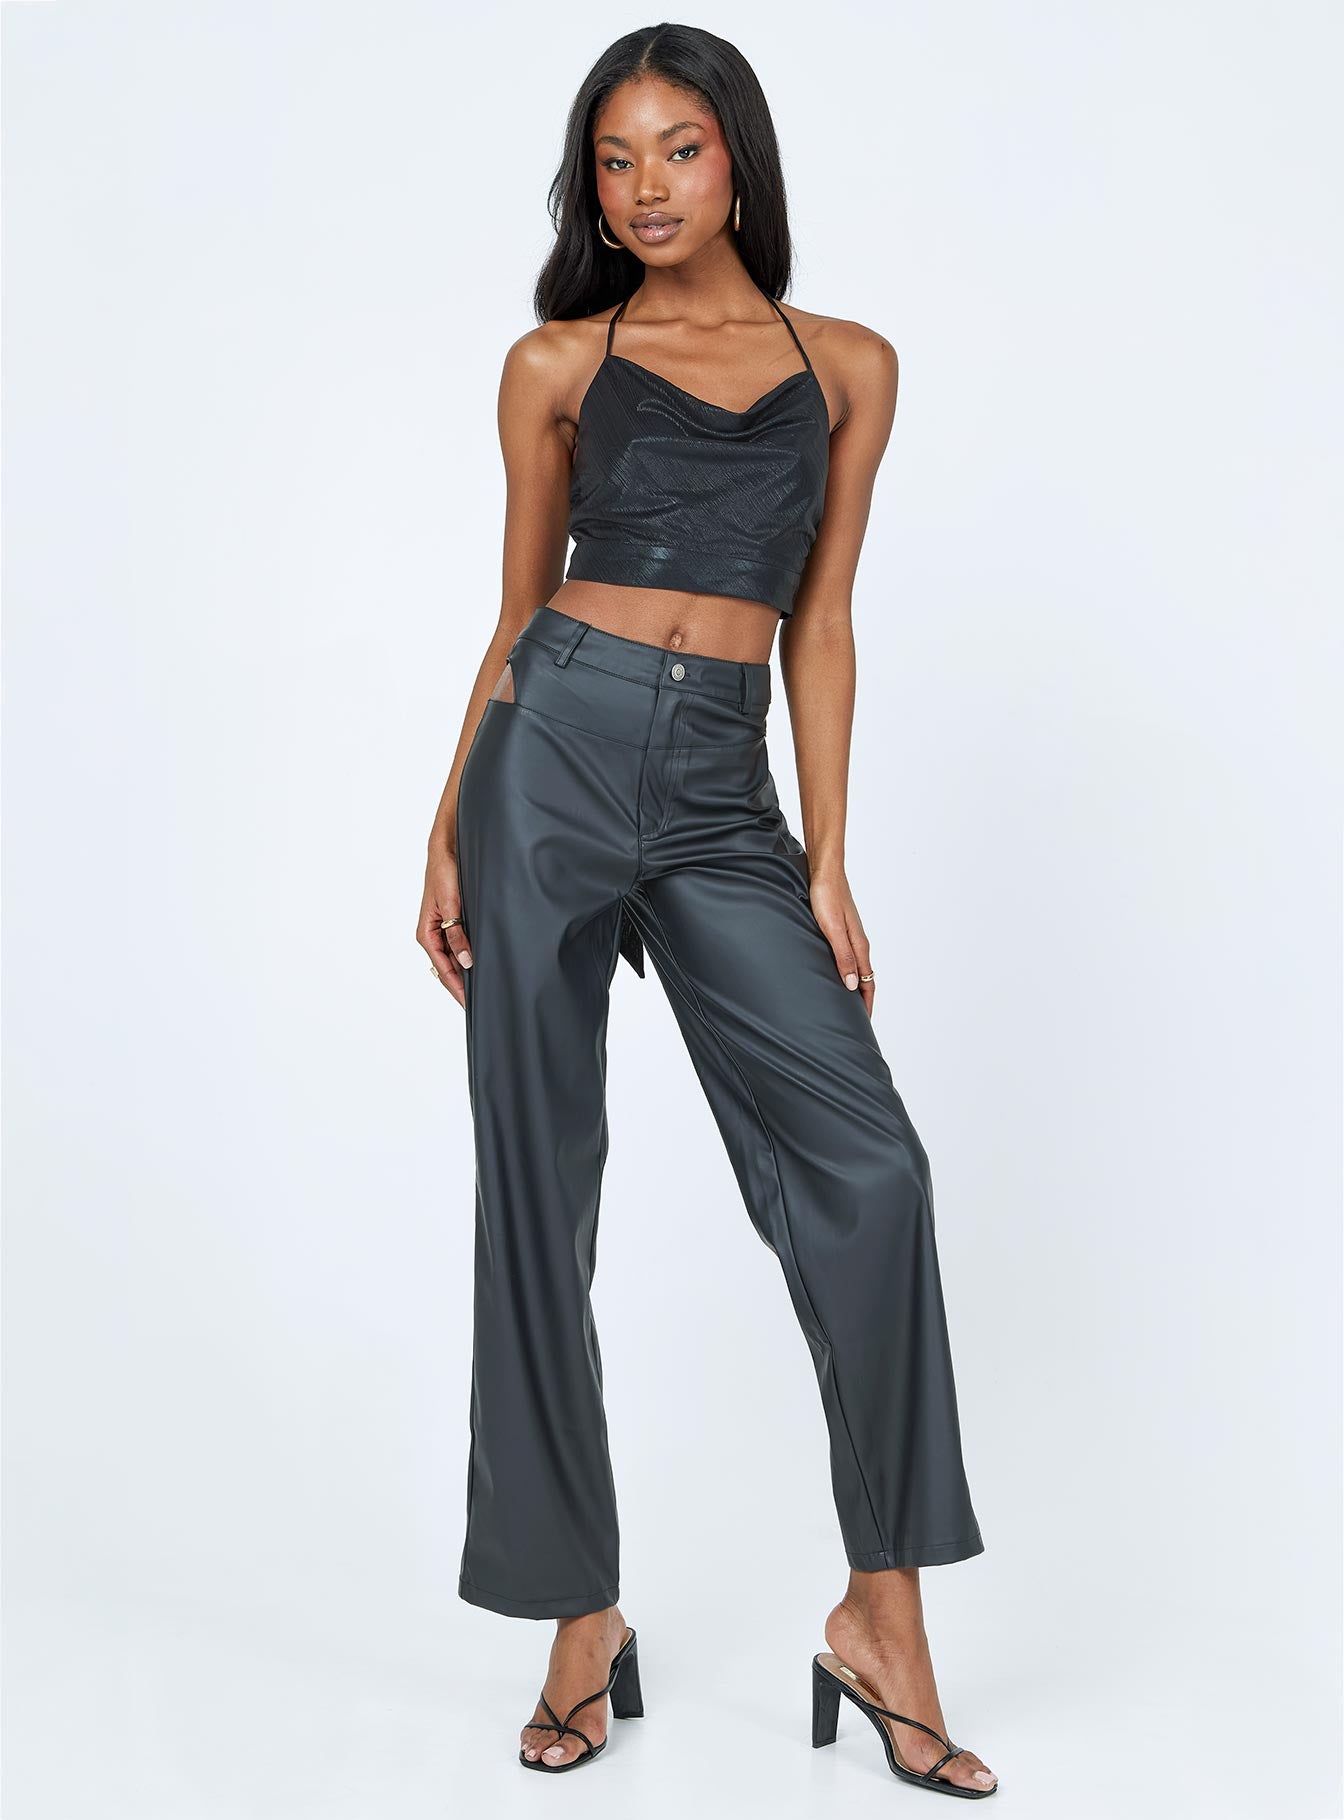 Hip Cut Out Hole Curled Skinny Long Jeans Denim Pants on Luulla